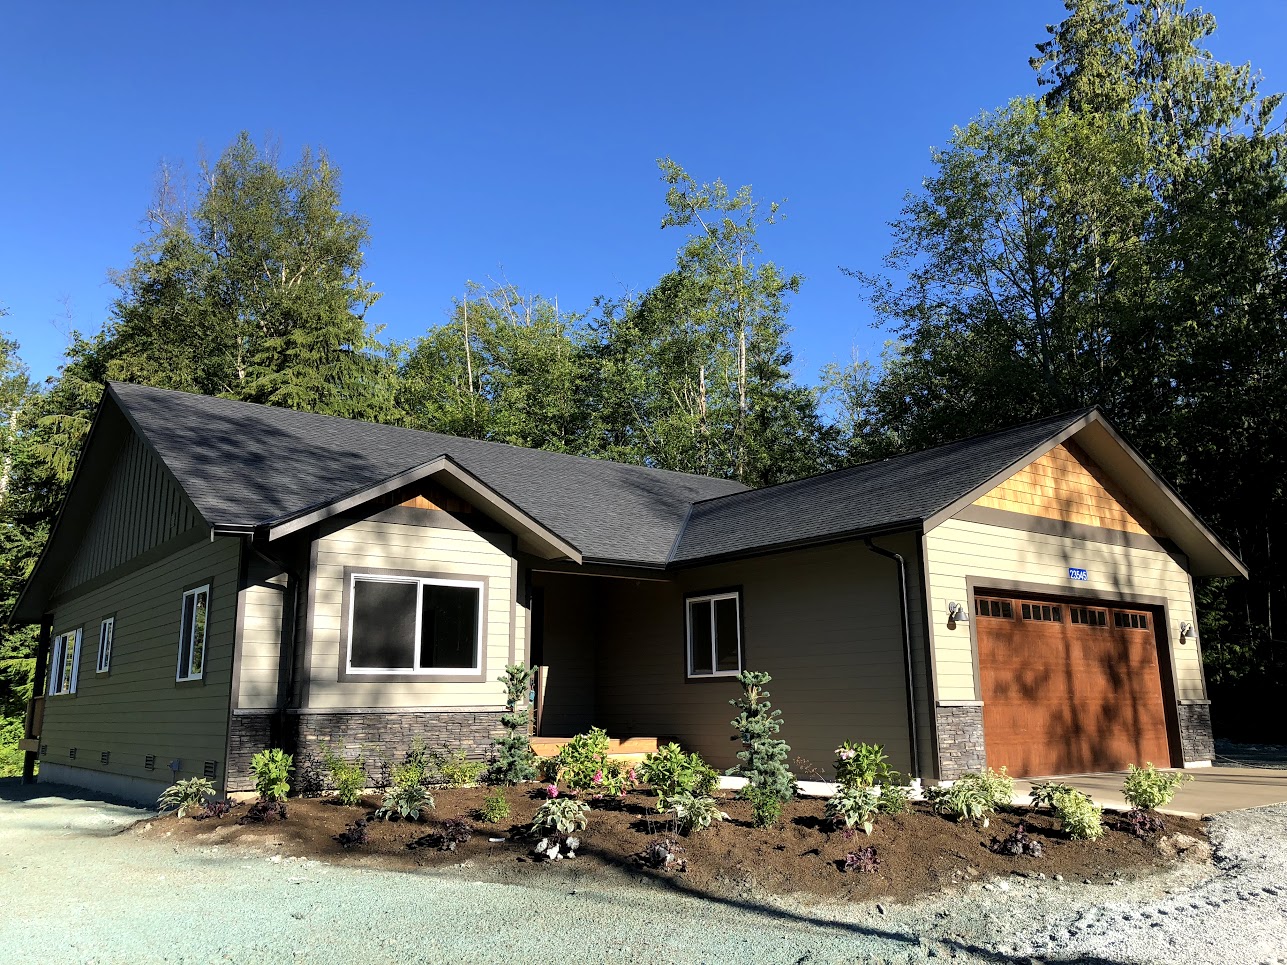 Mosier Road Houses – SOLD!